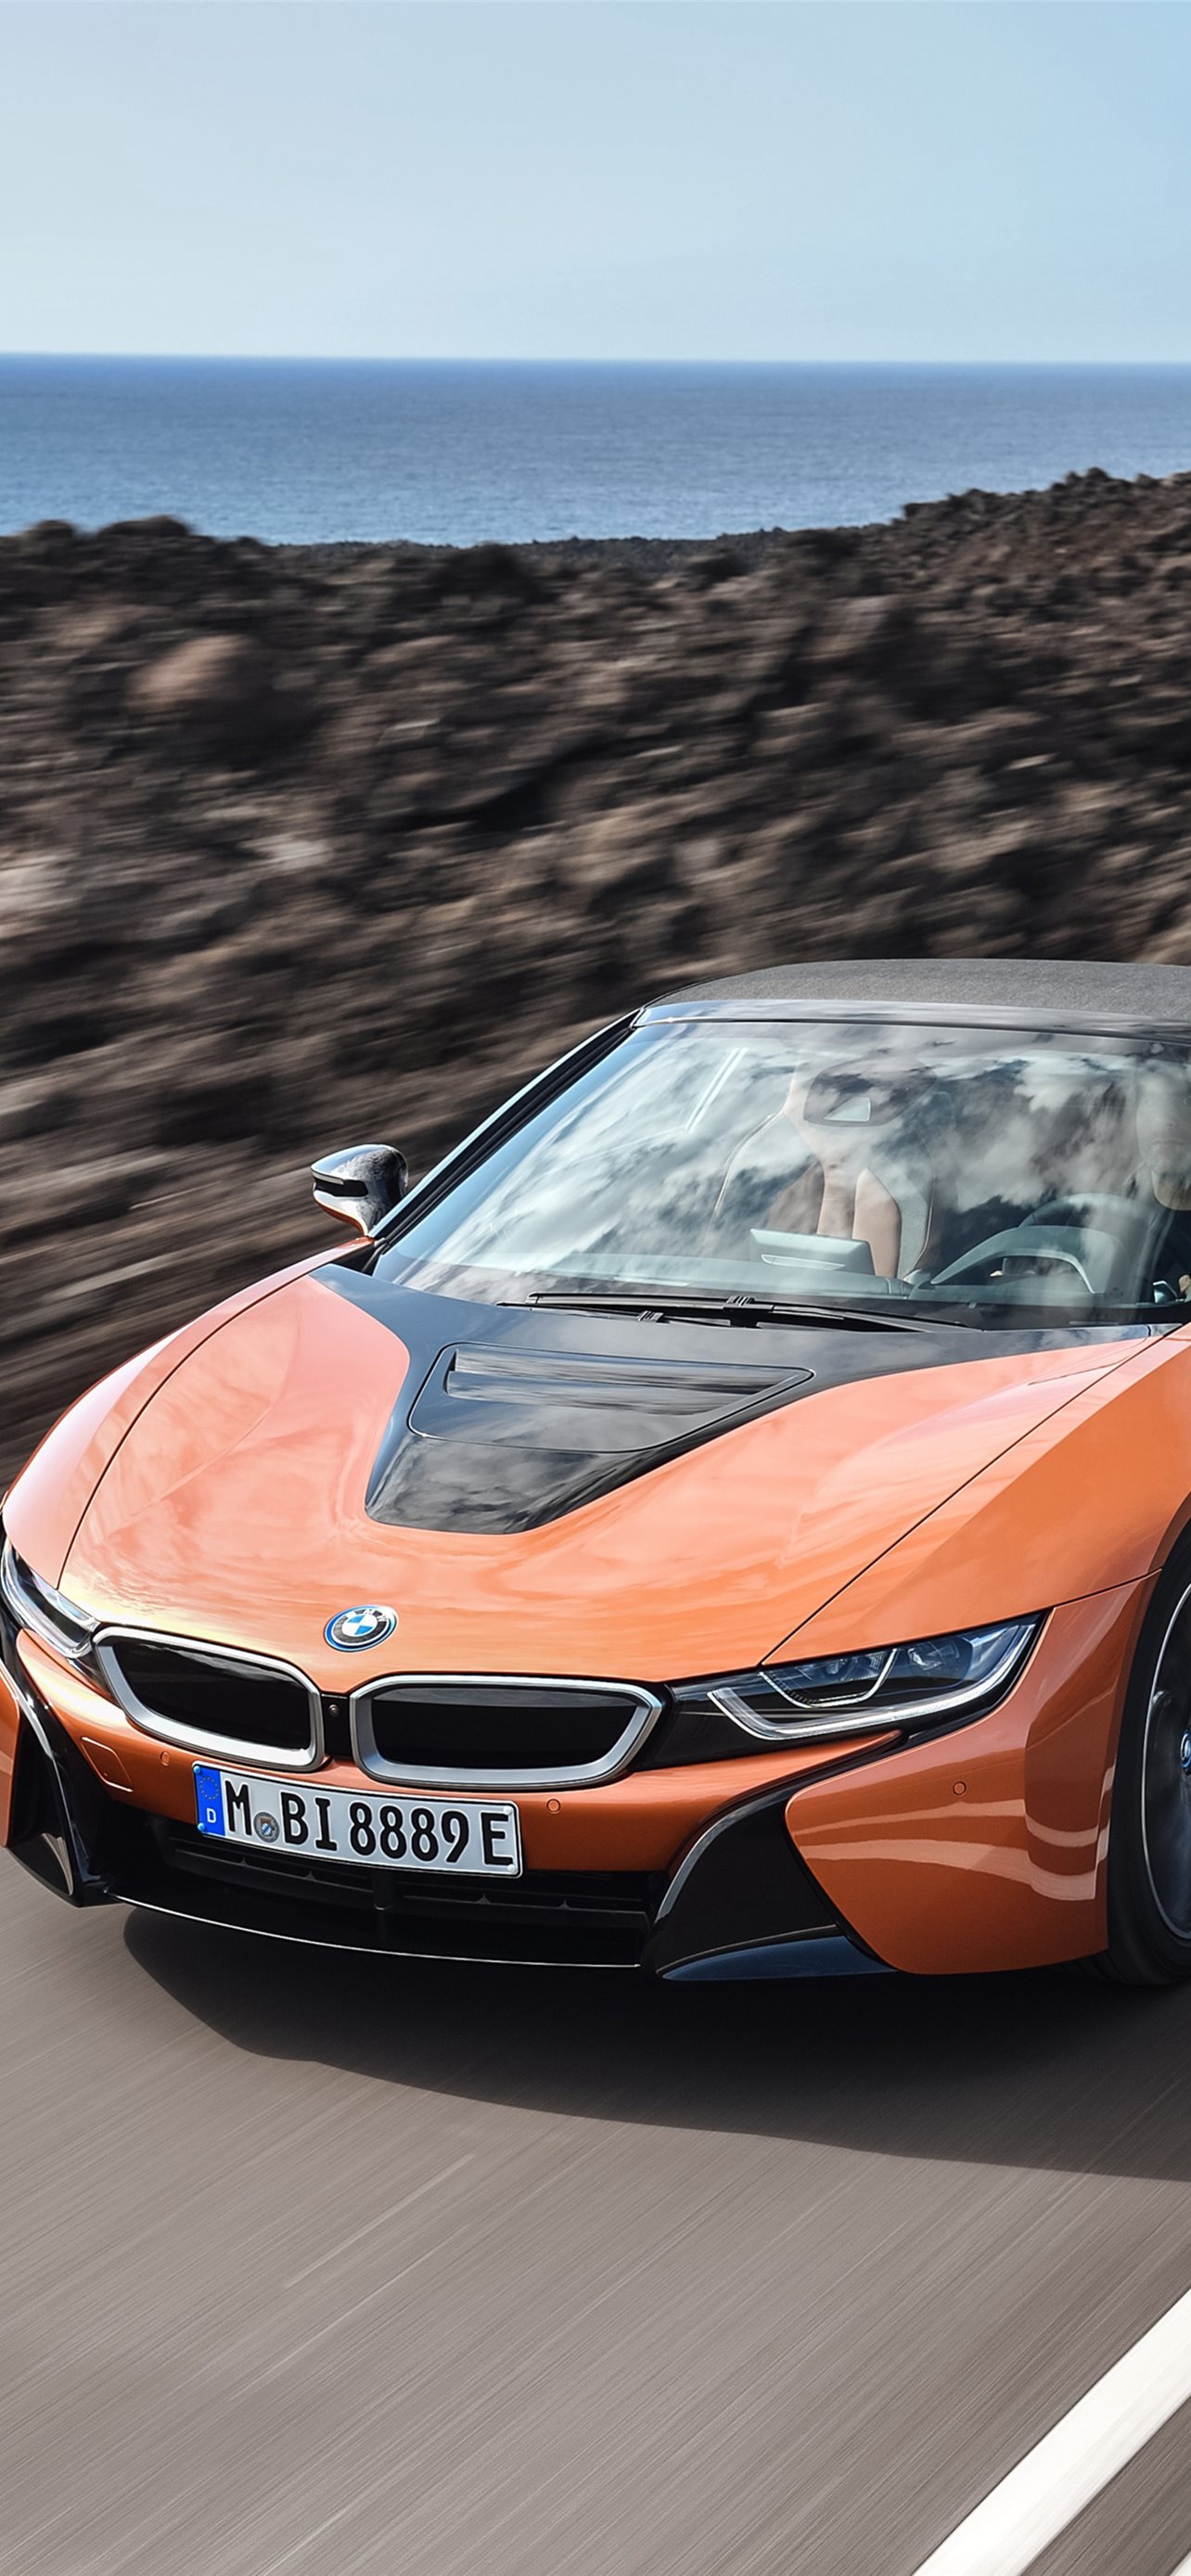 Bmw I8 Roadster Iphone Wallpapers Free Download